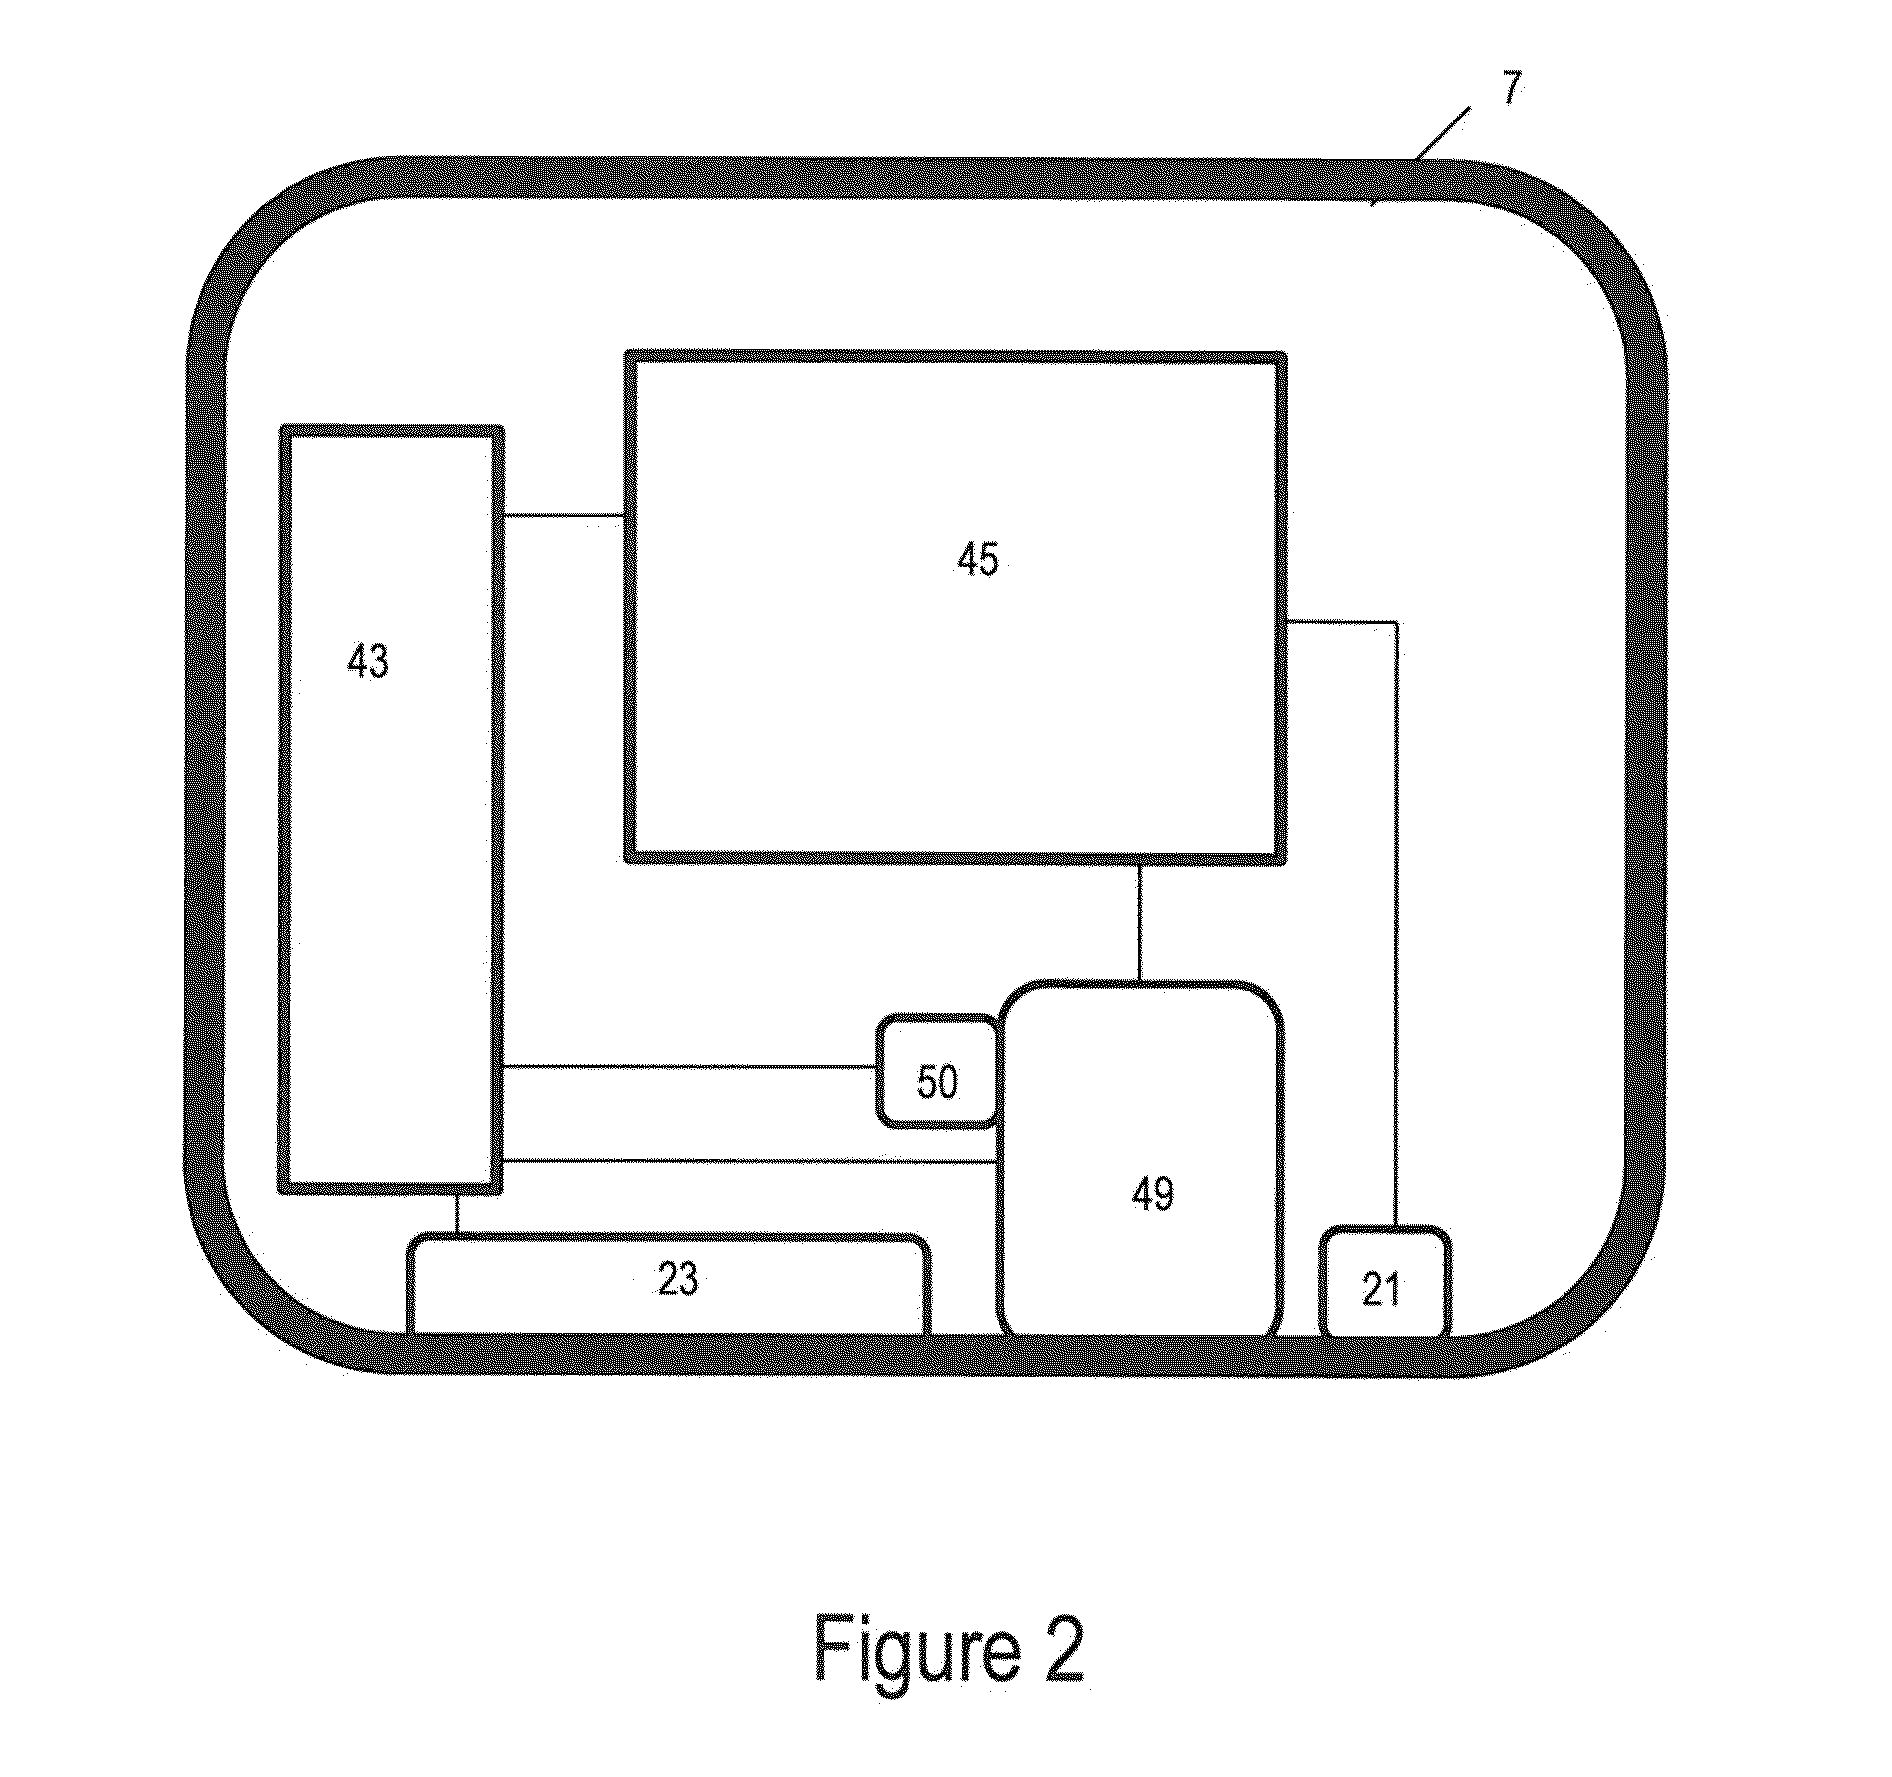 Integrated pump and generator device and method of use